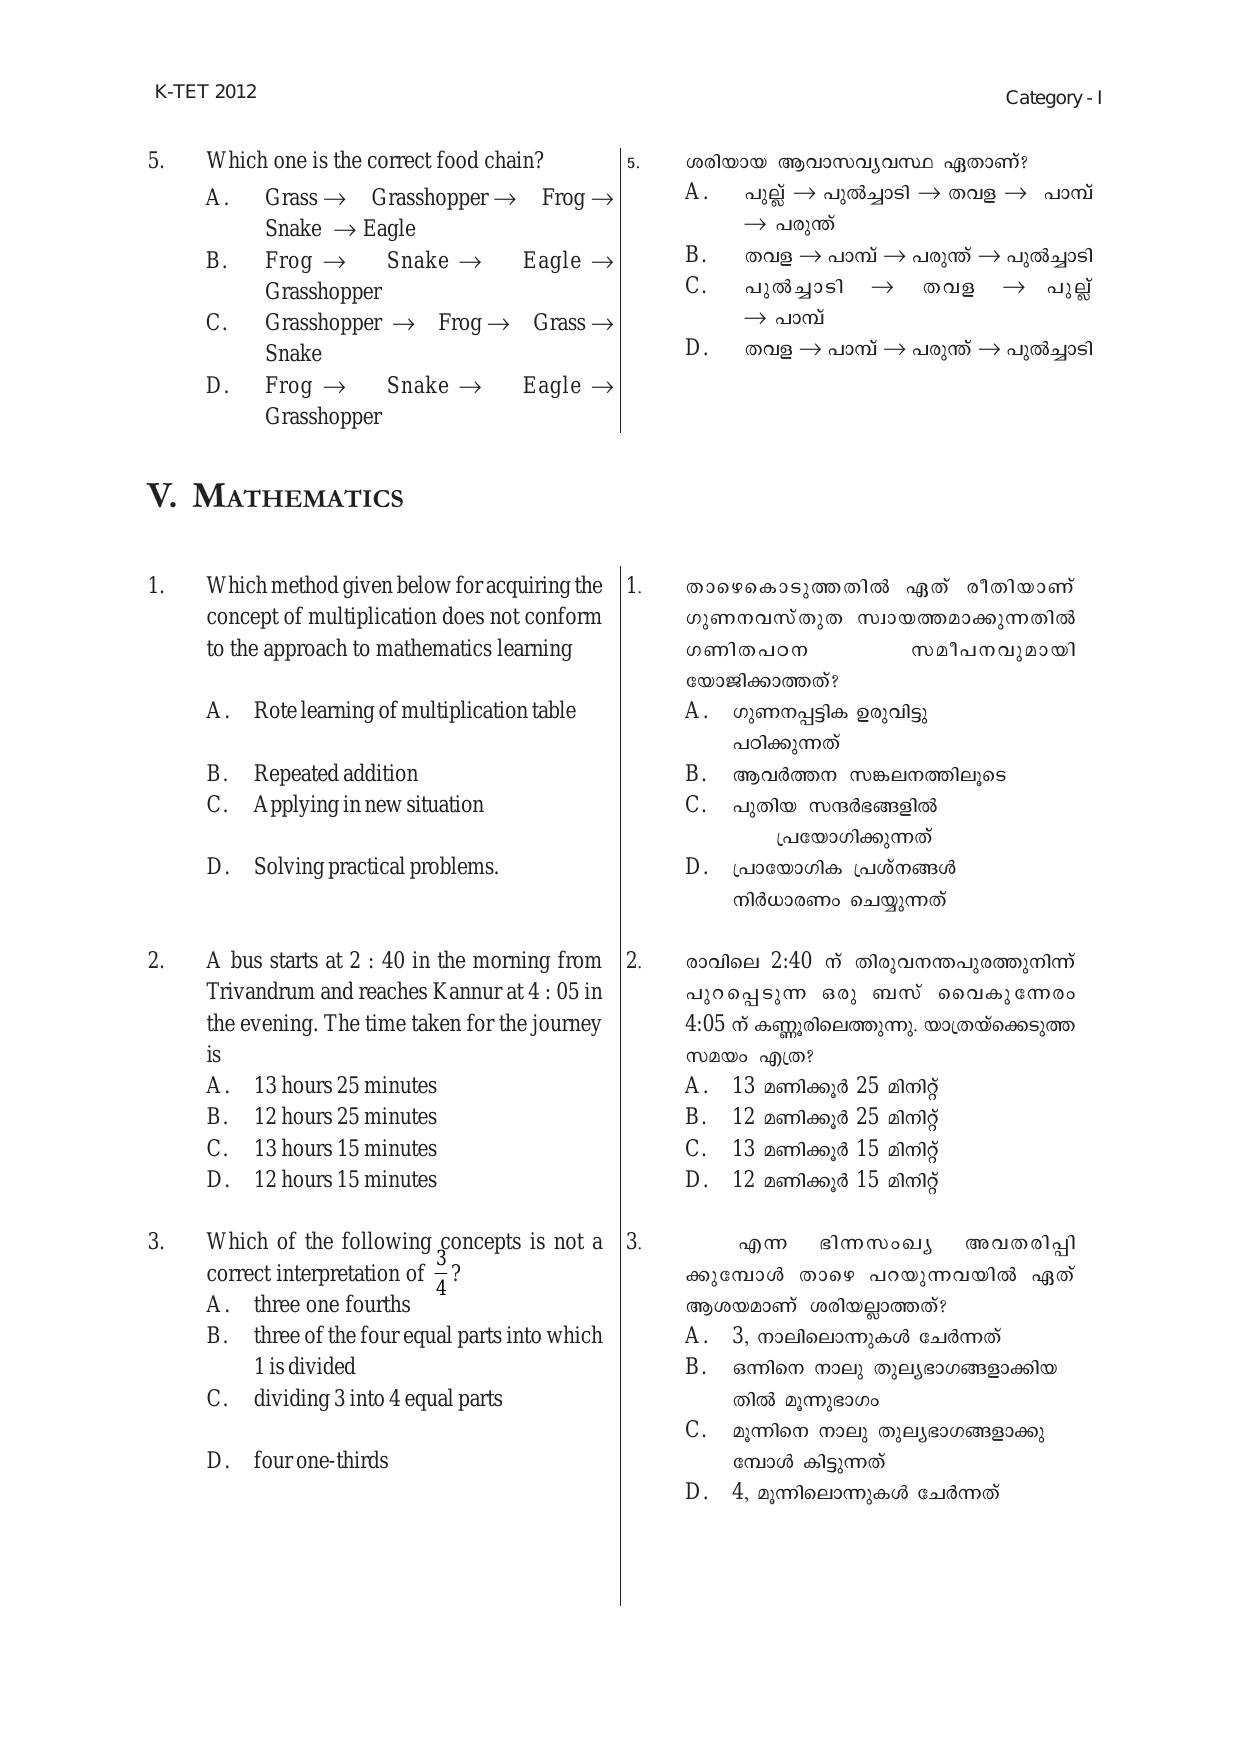 KTET Category 1 - Lower Primary Teacher (Class 1-5) Exam Old Papers - Page 12